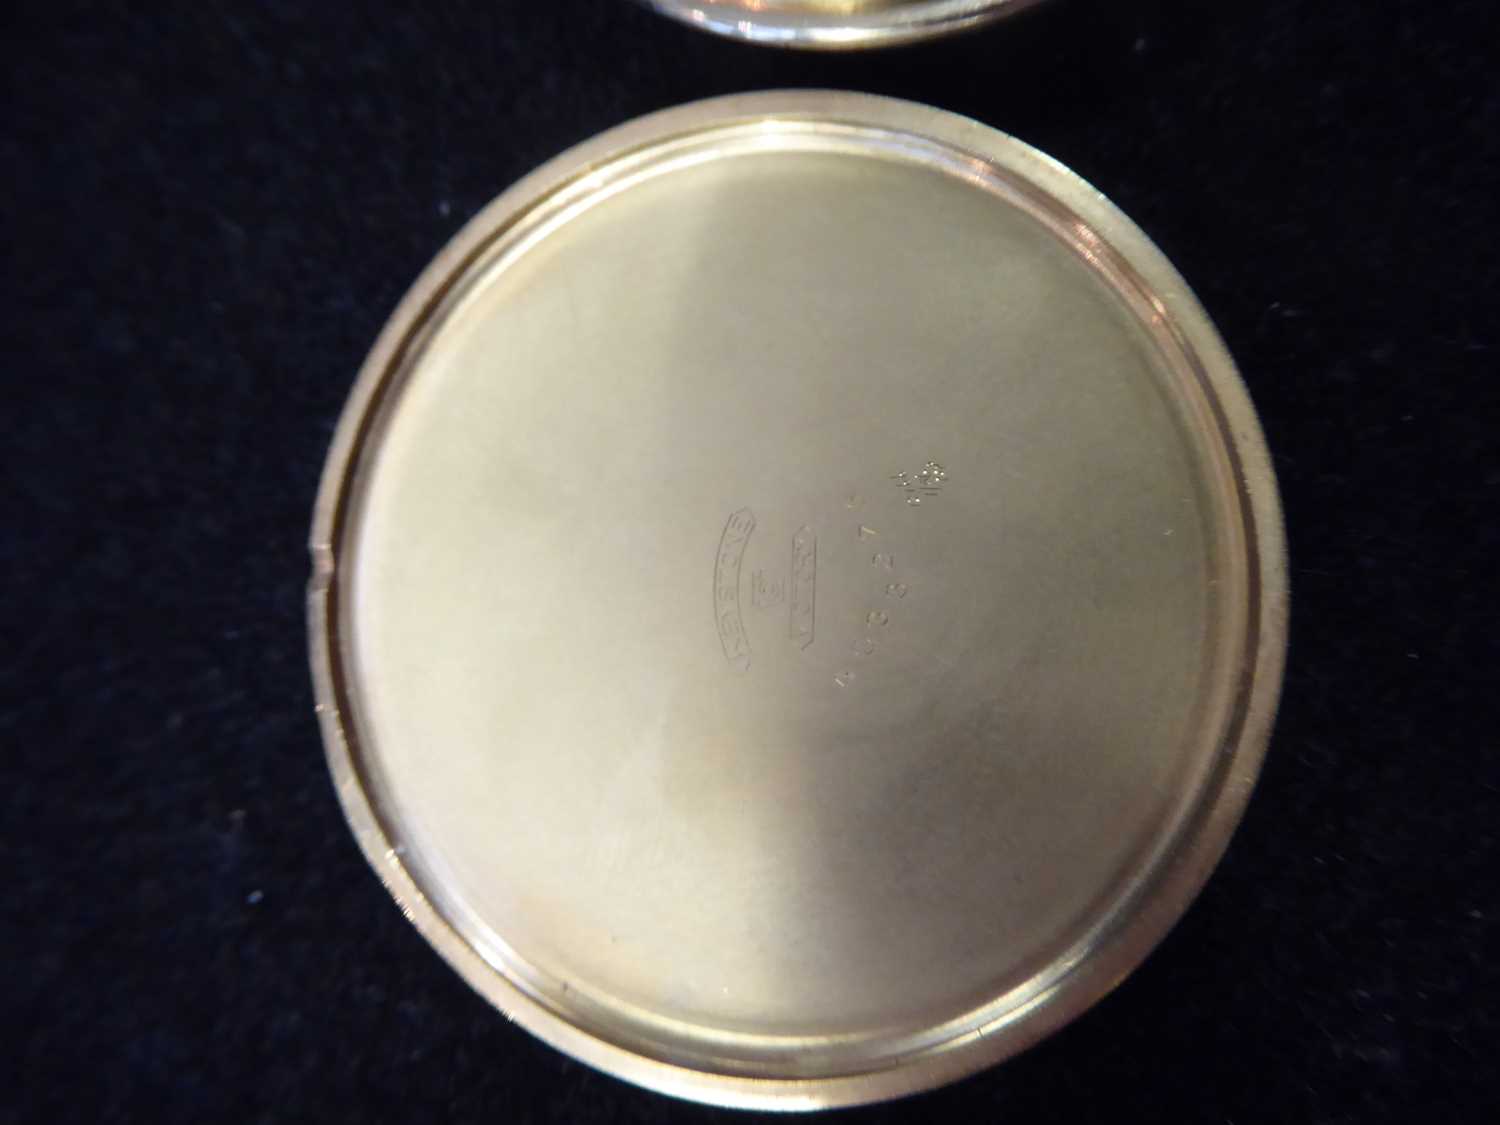 Rolex: A Rare Art Deco Observatory Quality Open Faced Pocket Watch signed Rolex, Observatory, circa - Image 9 of 12